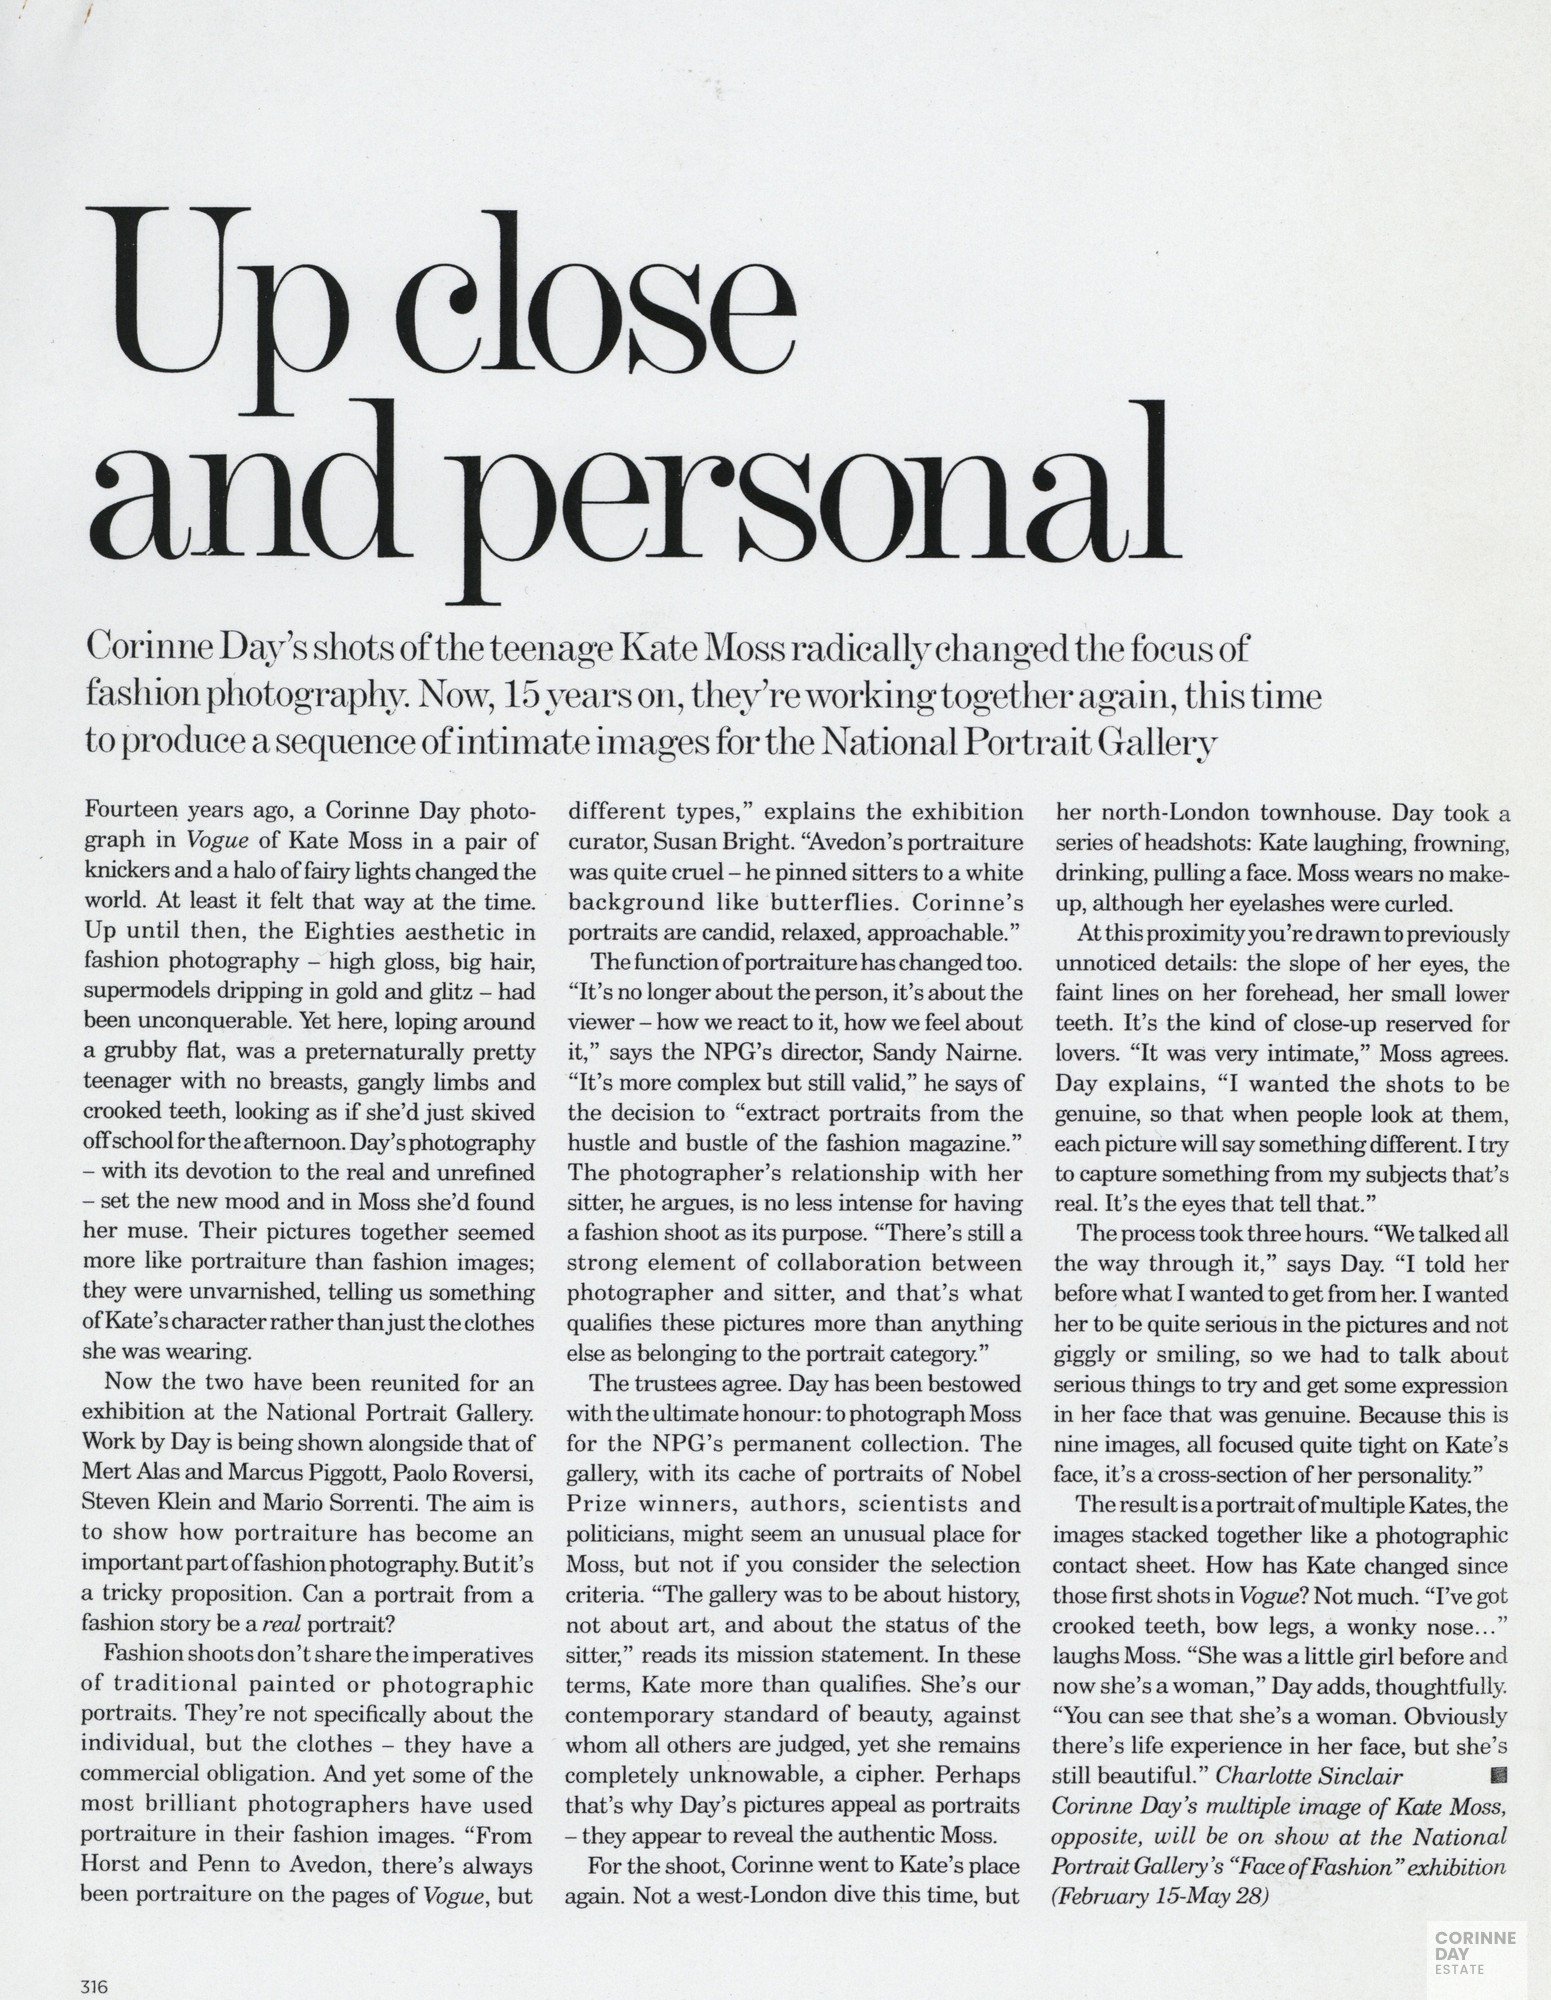 Up close and personal, British Vogue, Mar 2007 — Image 1 of 1